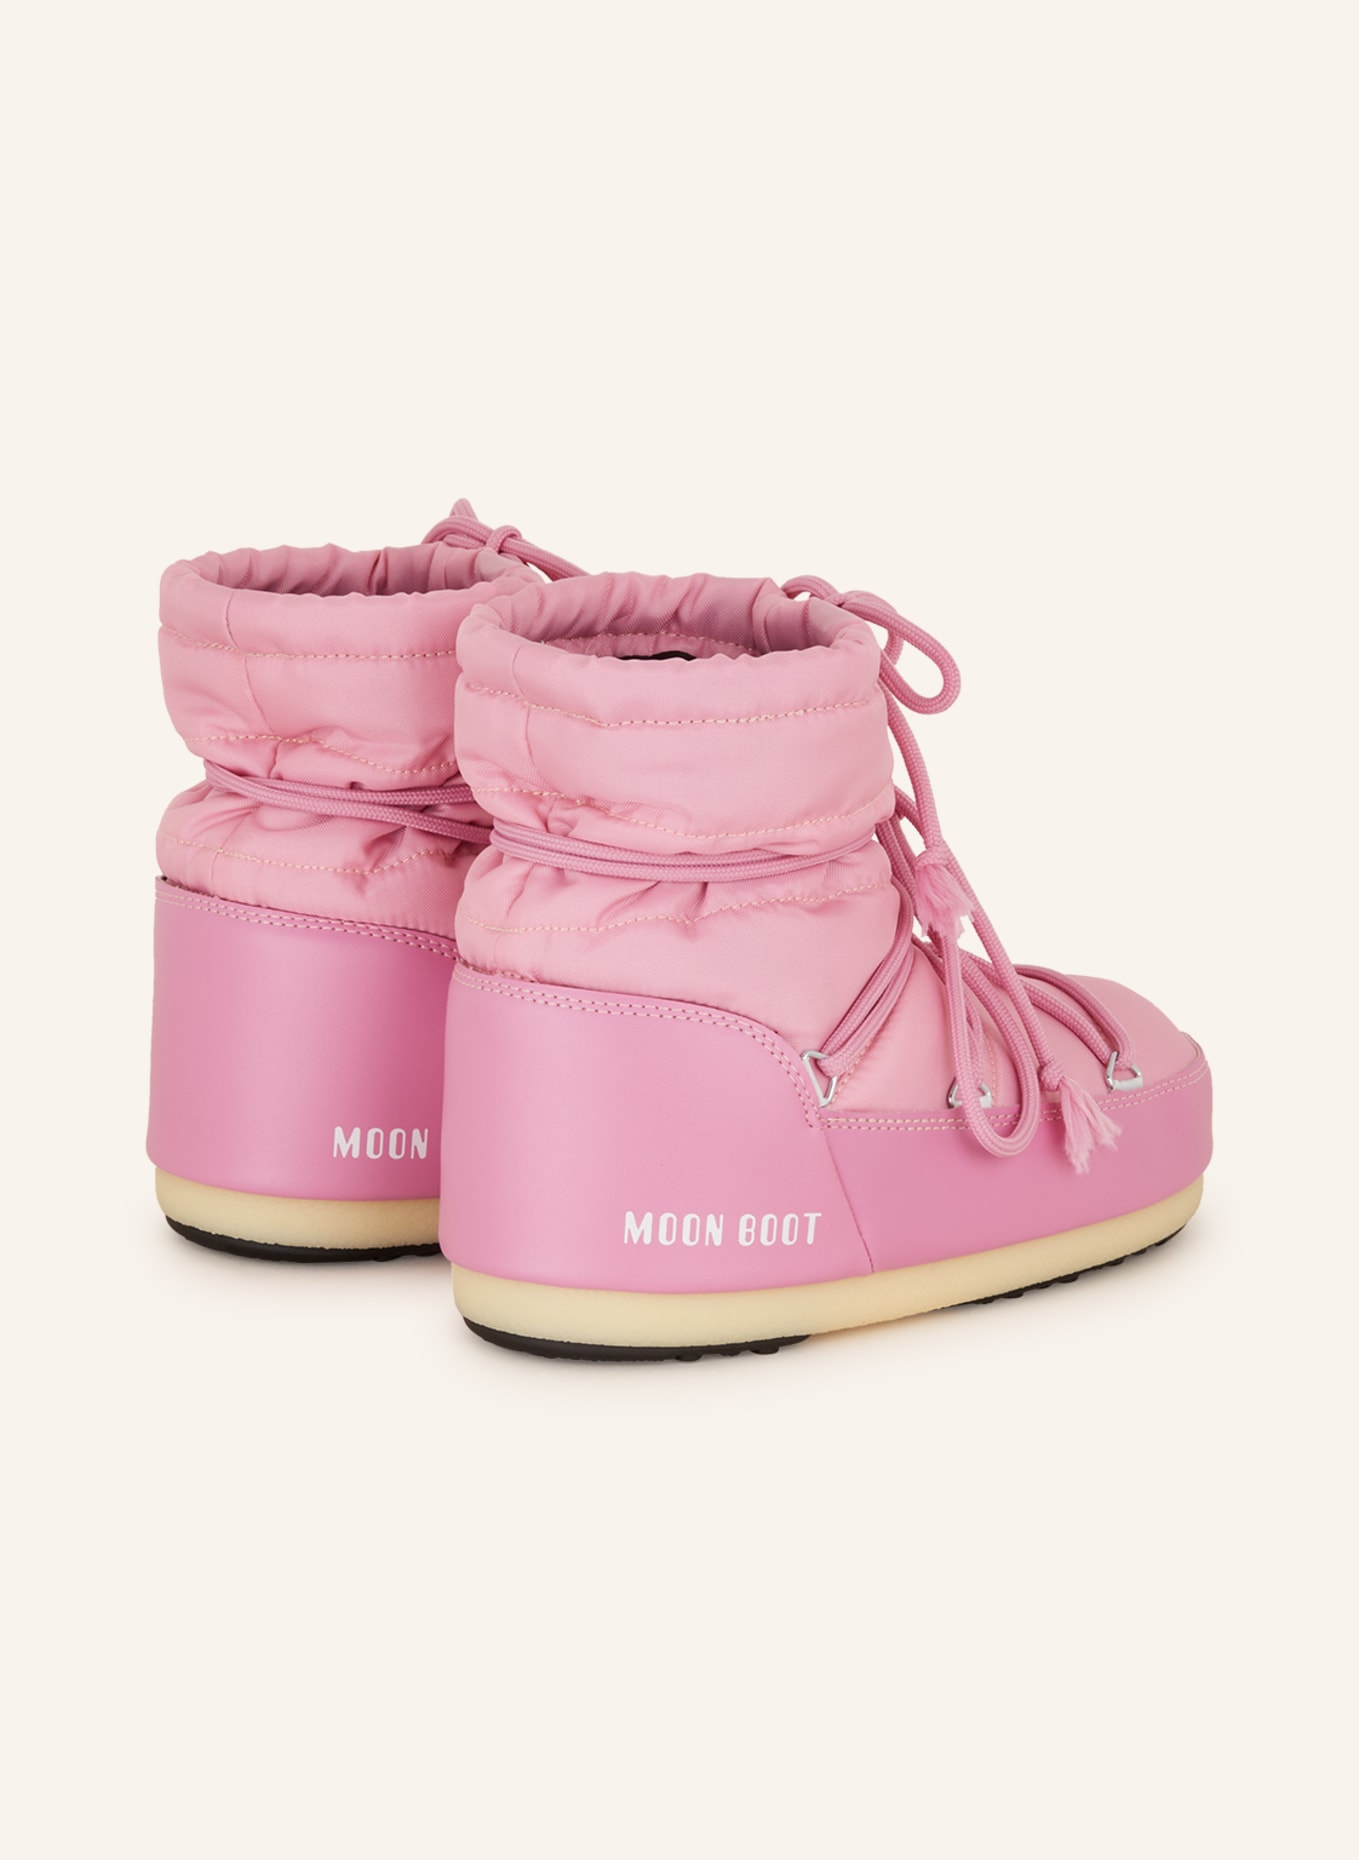 MOON BOOT Moon Boots ICON LOW, Farbe: PINK (Bild 2)